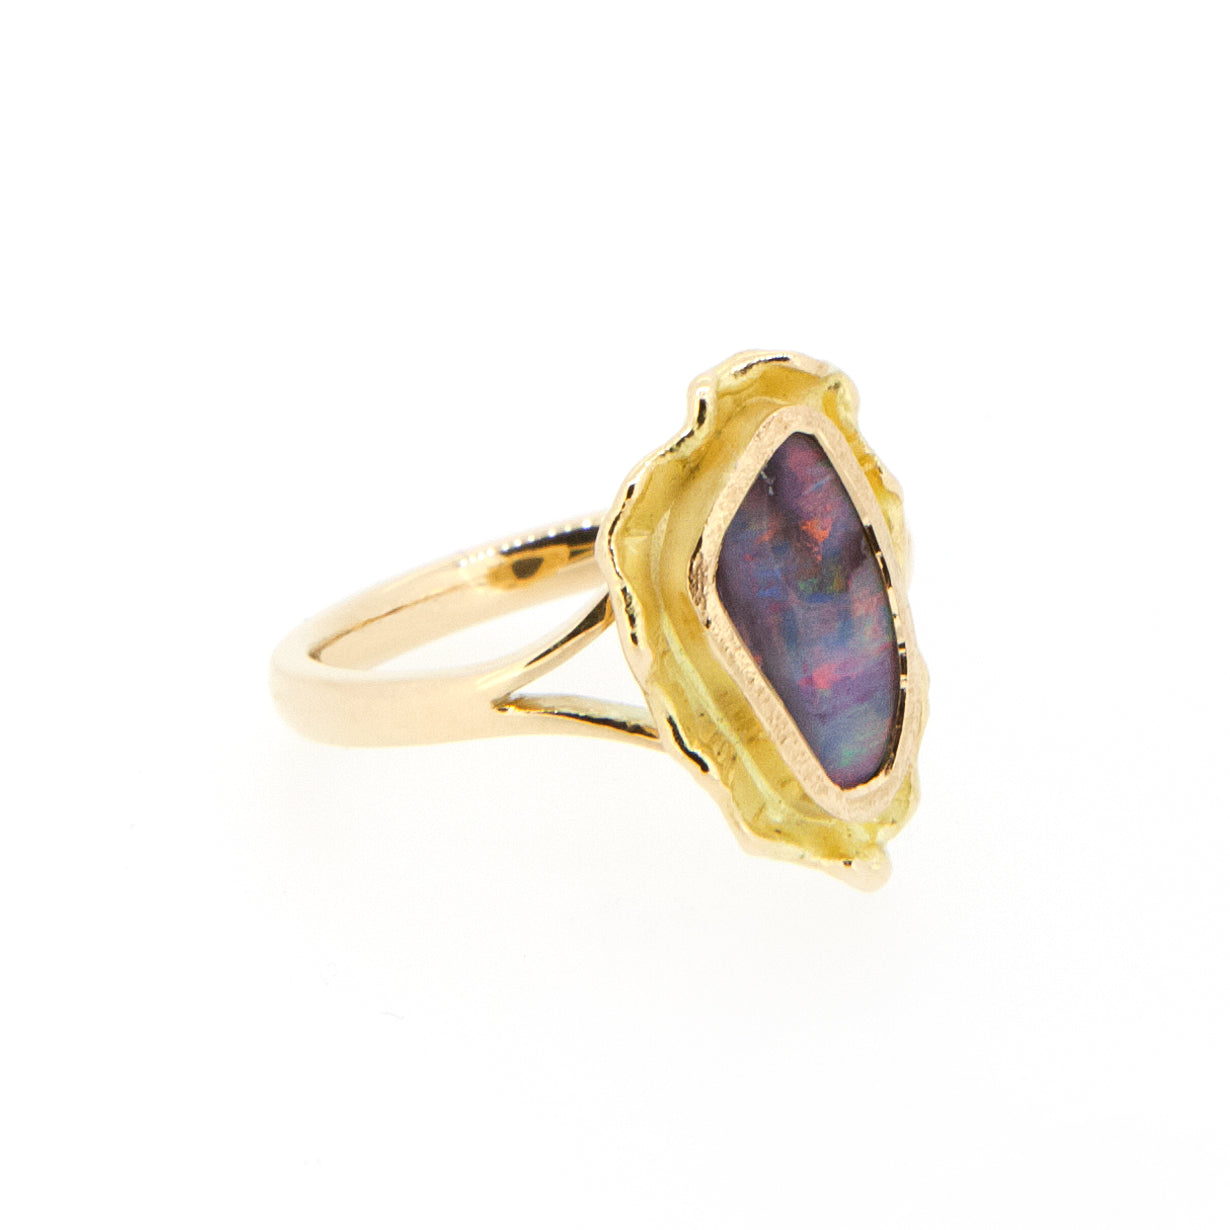 18ct Yellow gold with purple Queensland Boulder Opal. Ethically sourced, hand crafted and Australian Made.